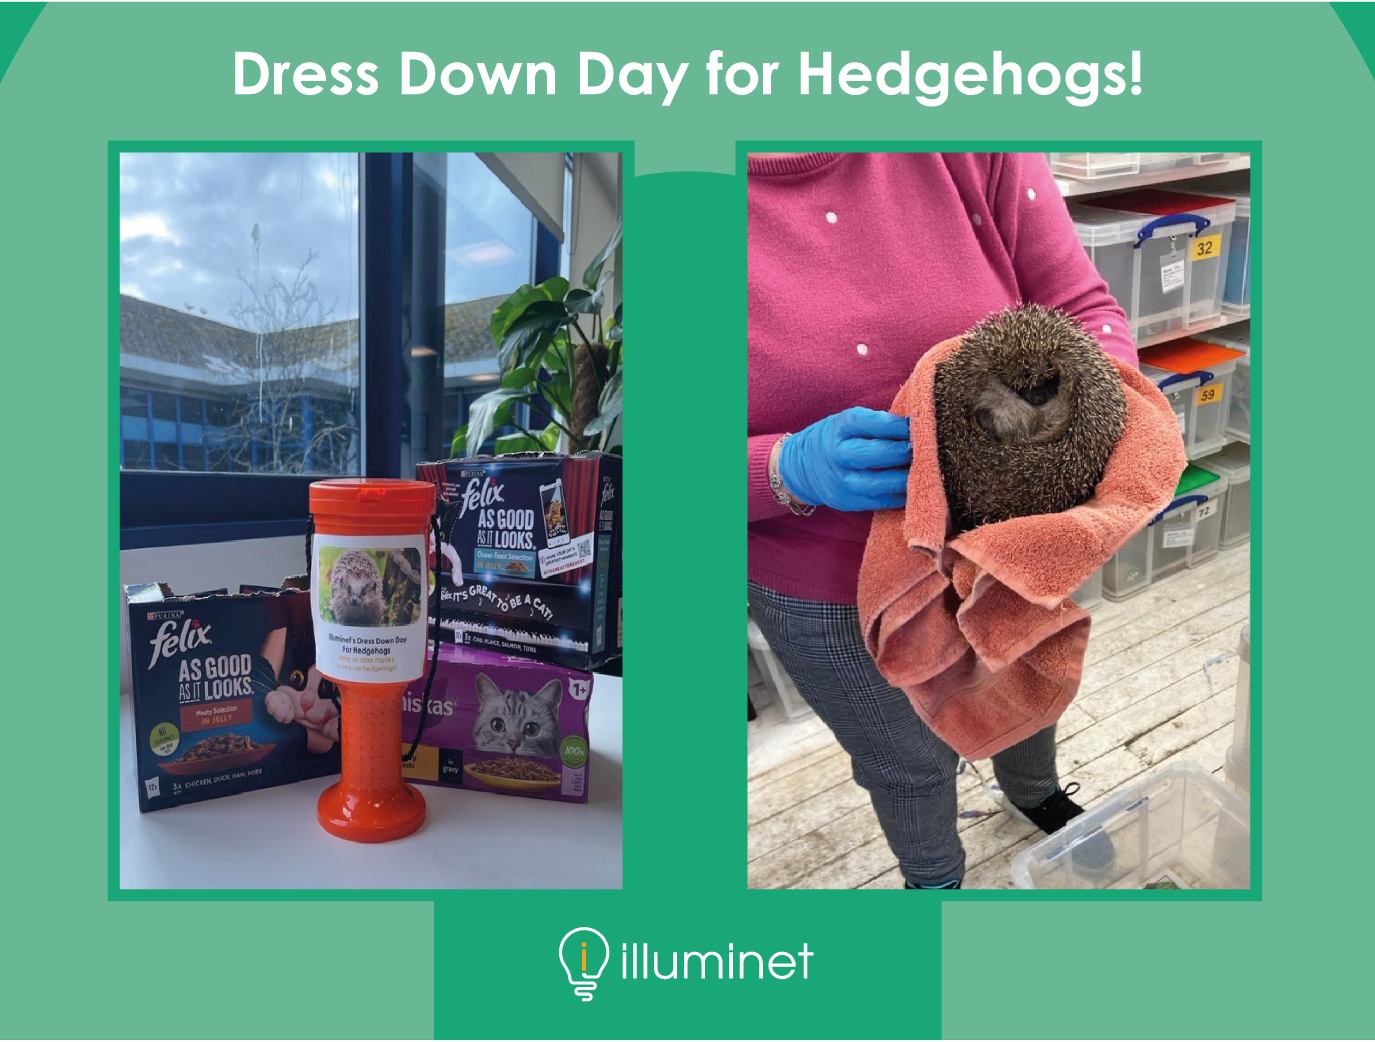 Illuminet's 'Dress-down Day' in aid of Hedgehogs.